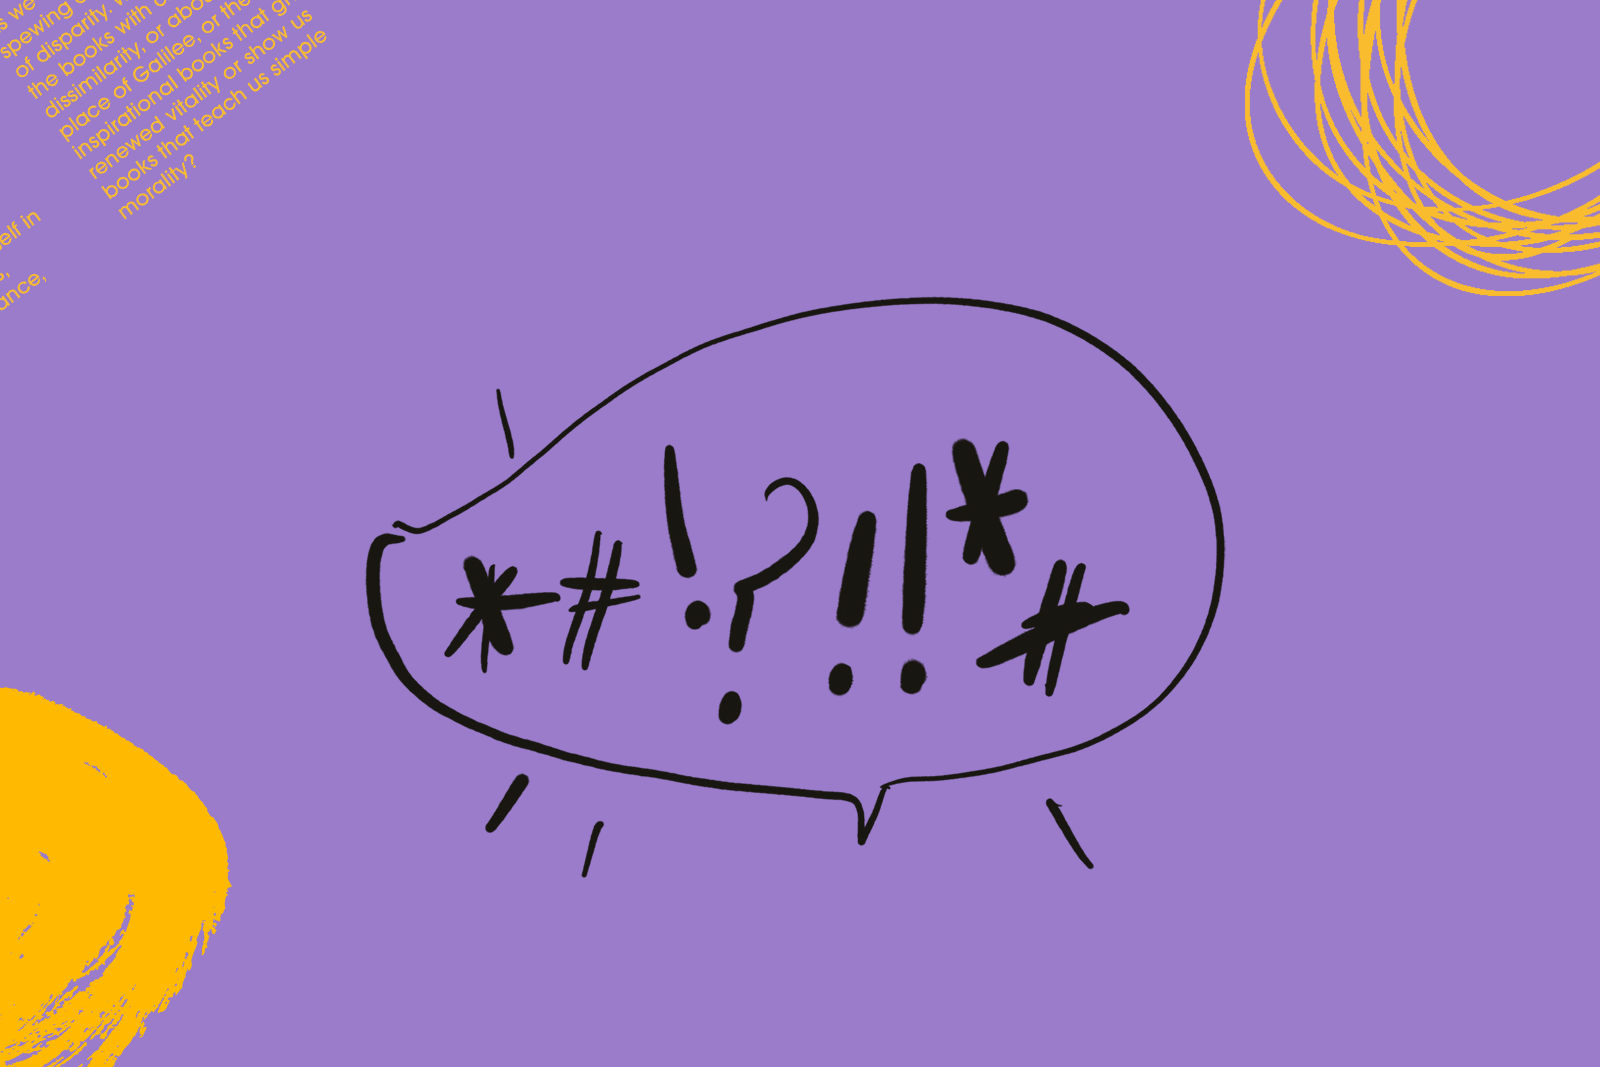 a line illustration of an illustrated speech bubble, on a purple background and with yellow highlights